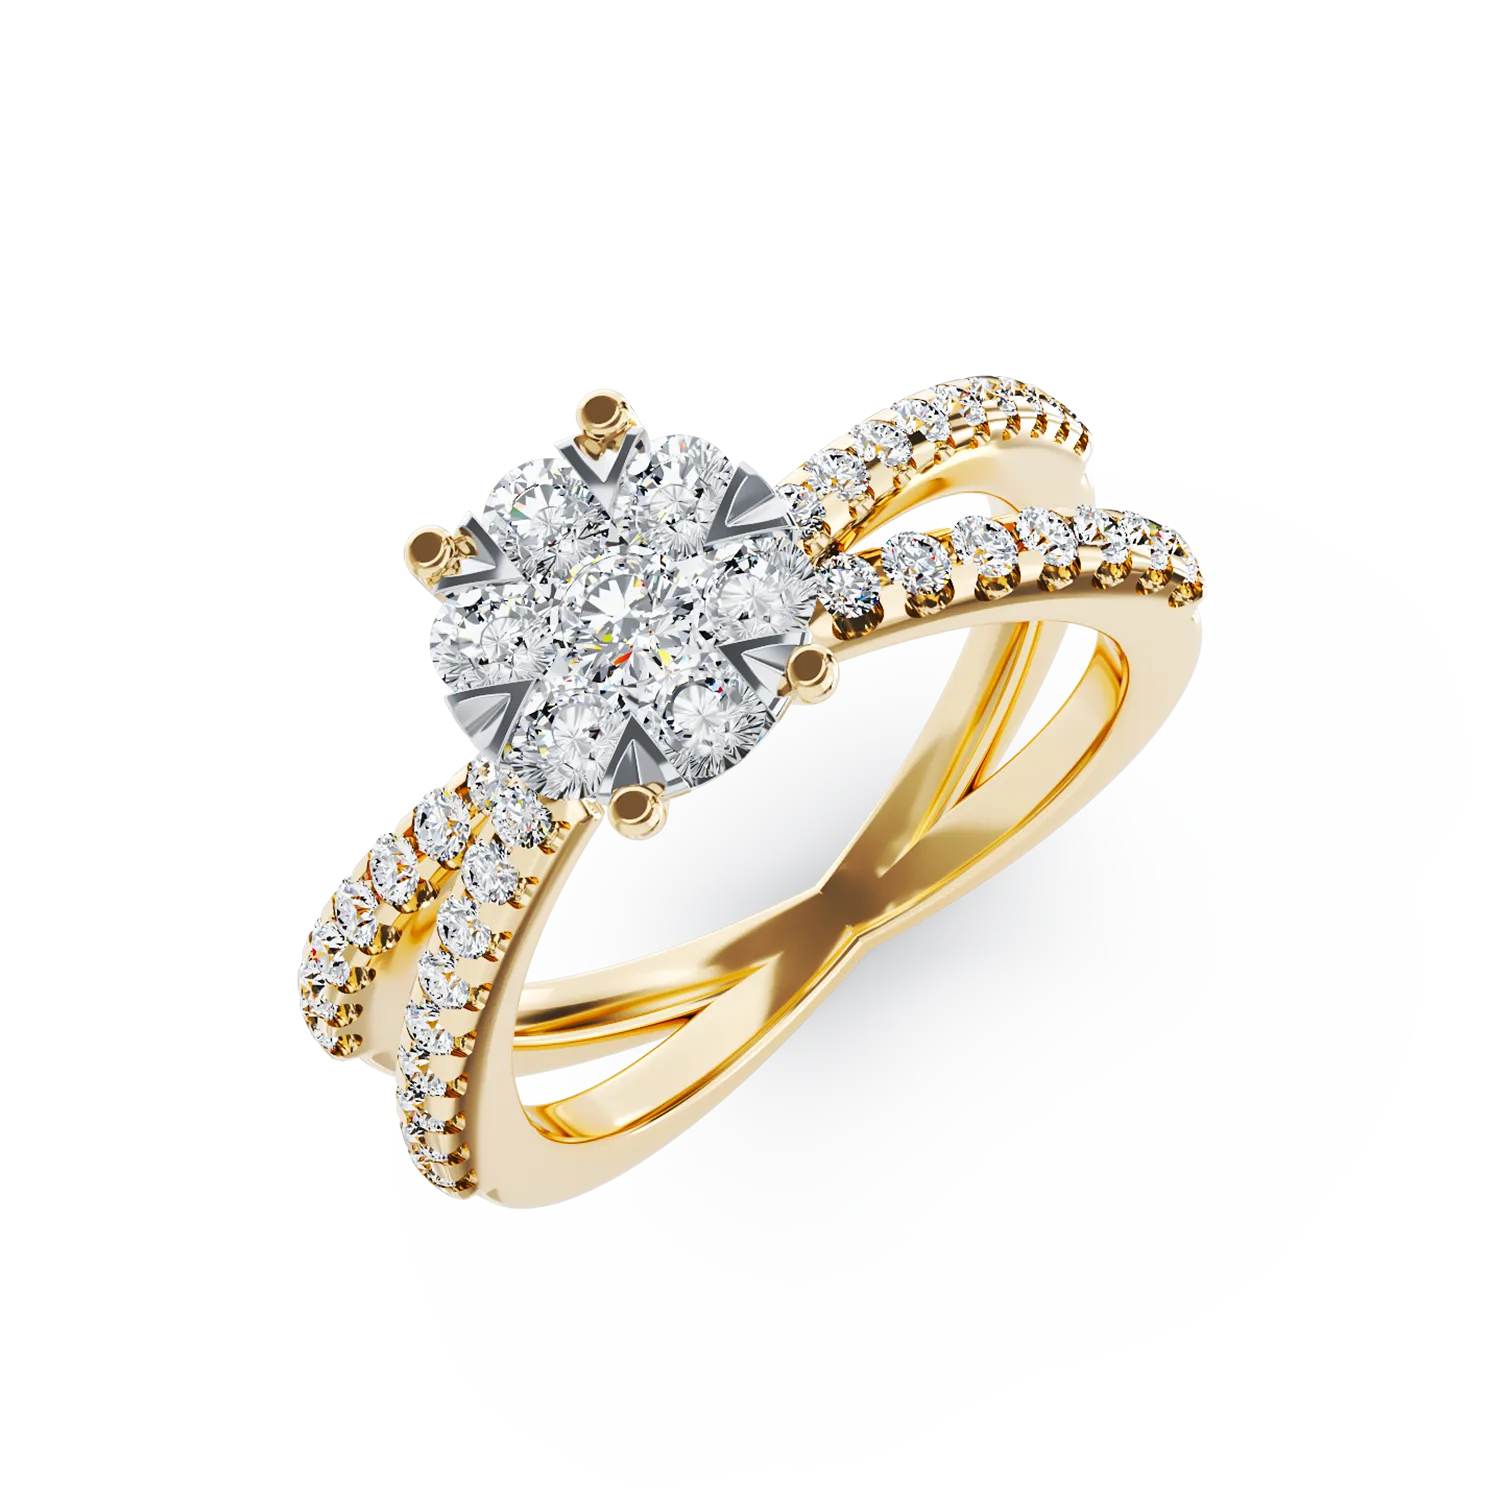 18K yellow gold engagement ring with 0.6ct diamonds